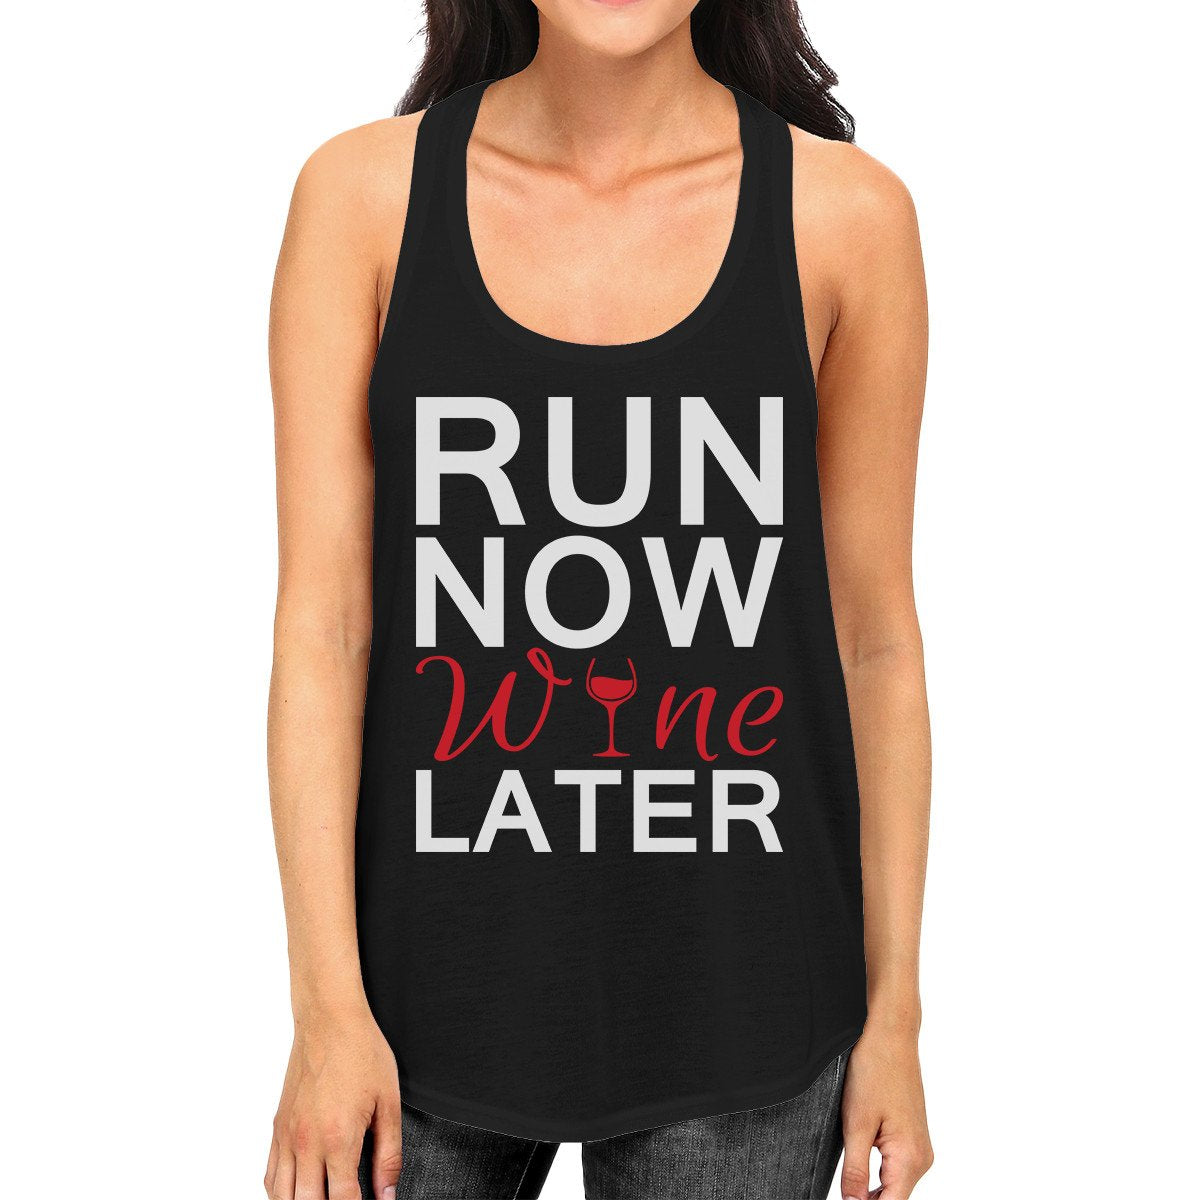 Cute Tank Top - Run Now Wine Later - Cute Gym Clothes, Workout